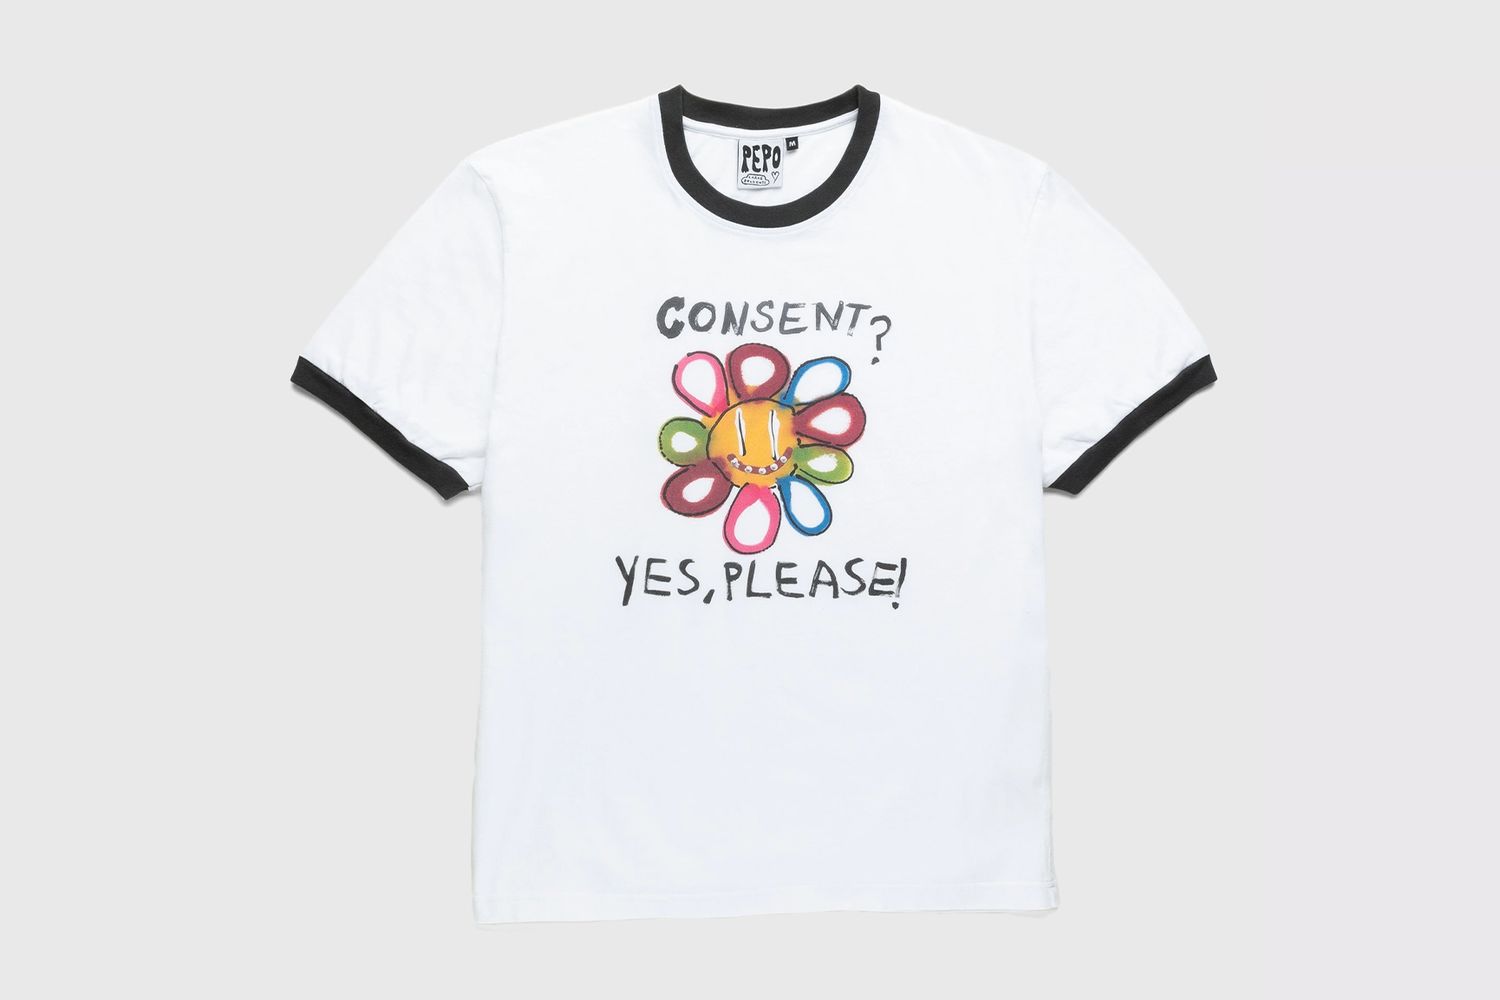 Consent? Yes, Please! T-Shirt